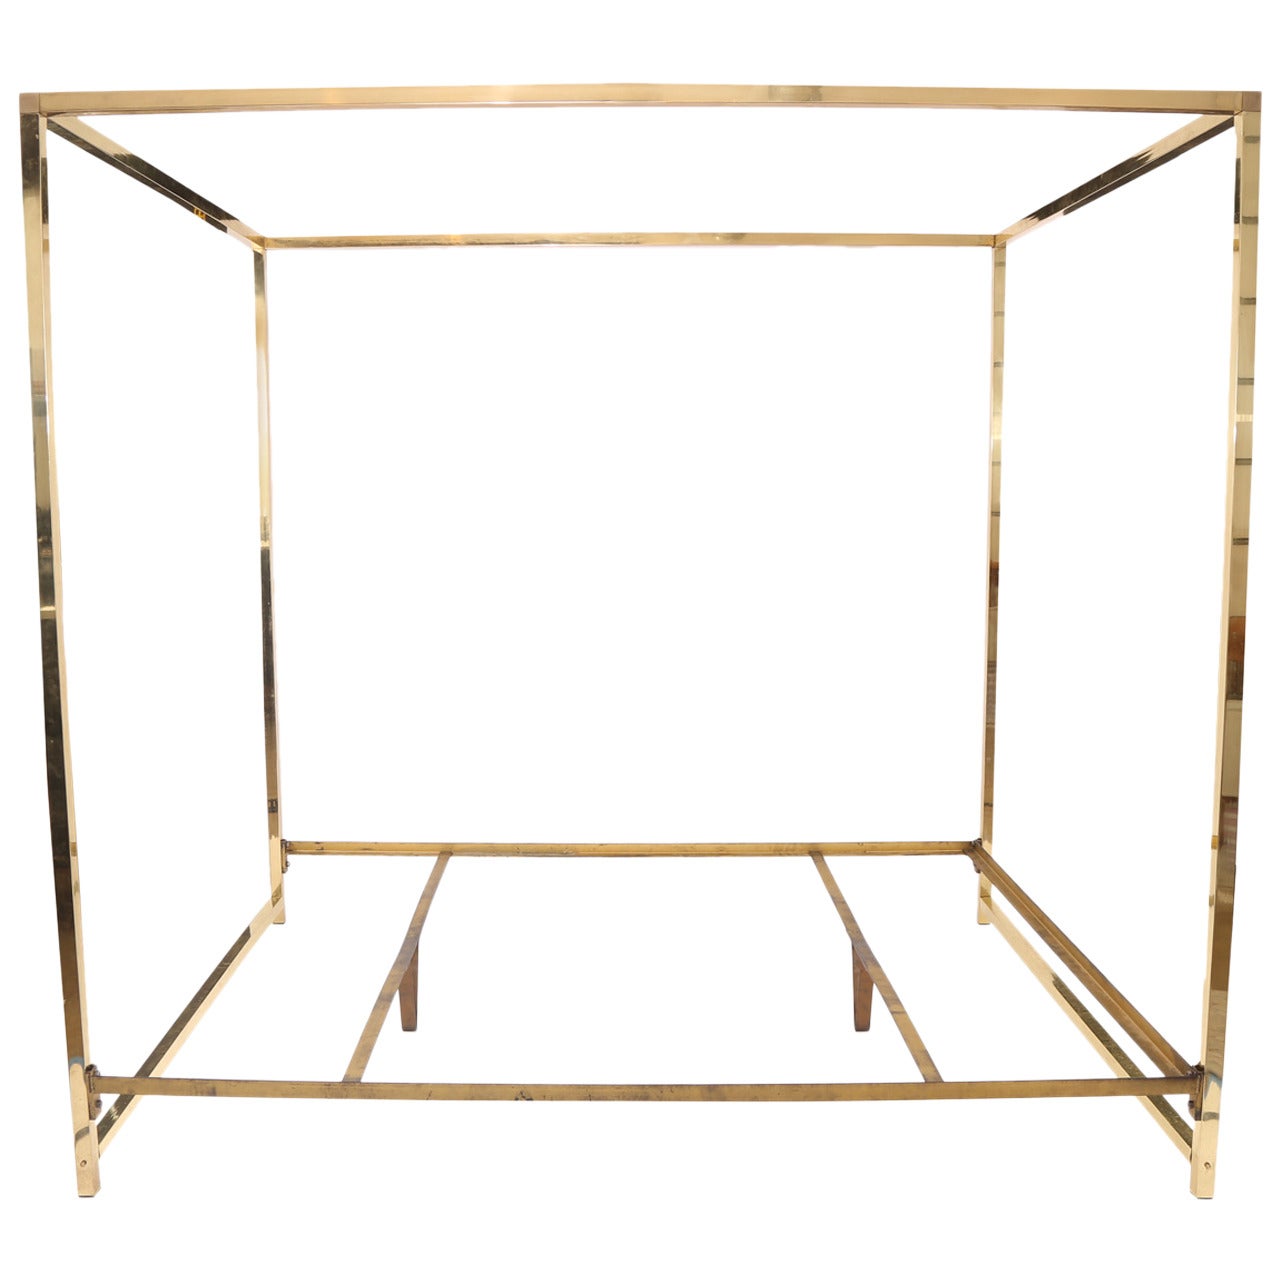 Fabulous Brass King Canopy Bed